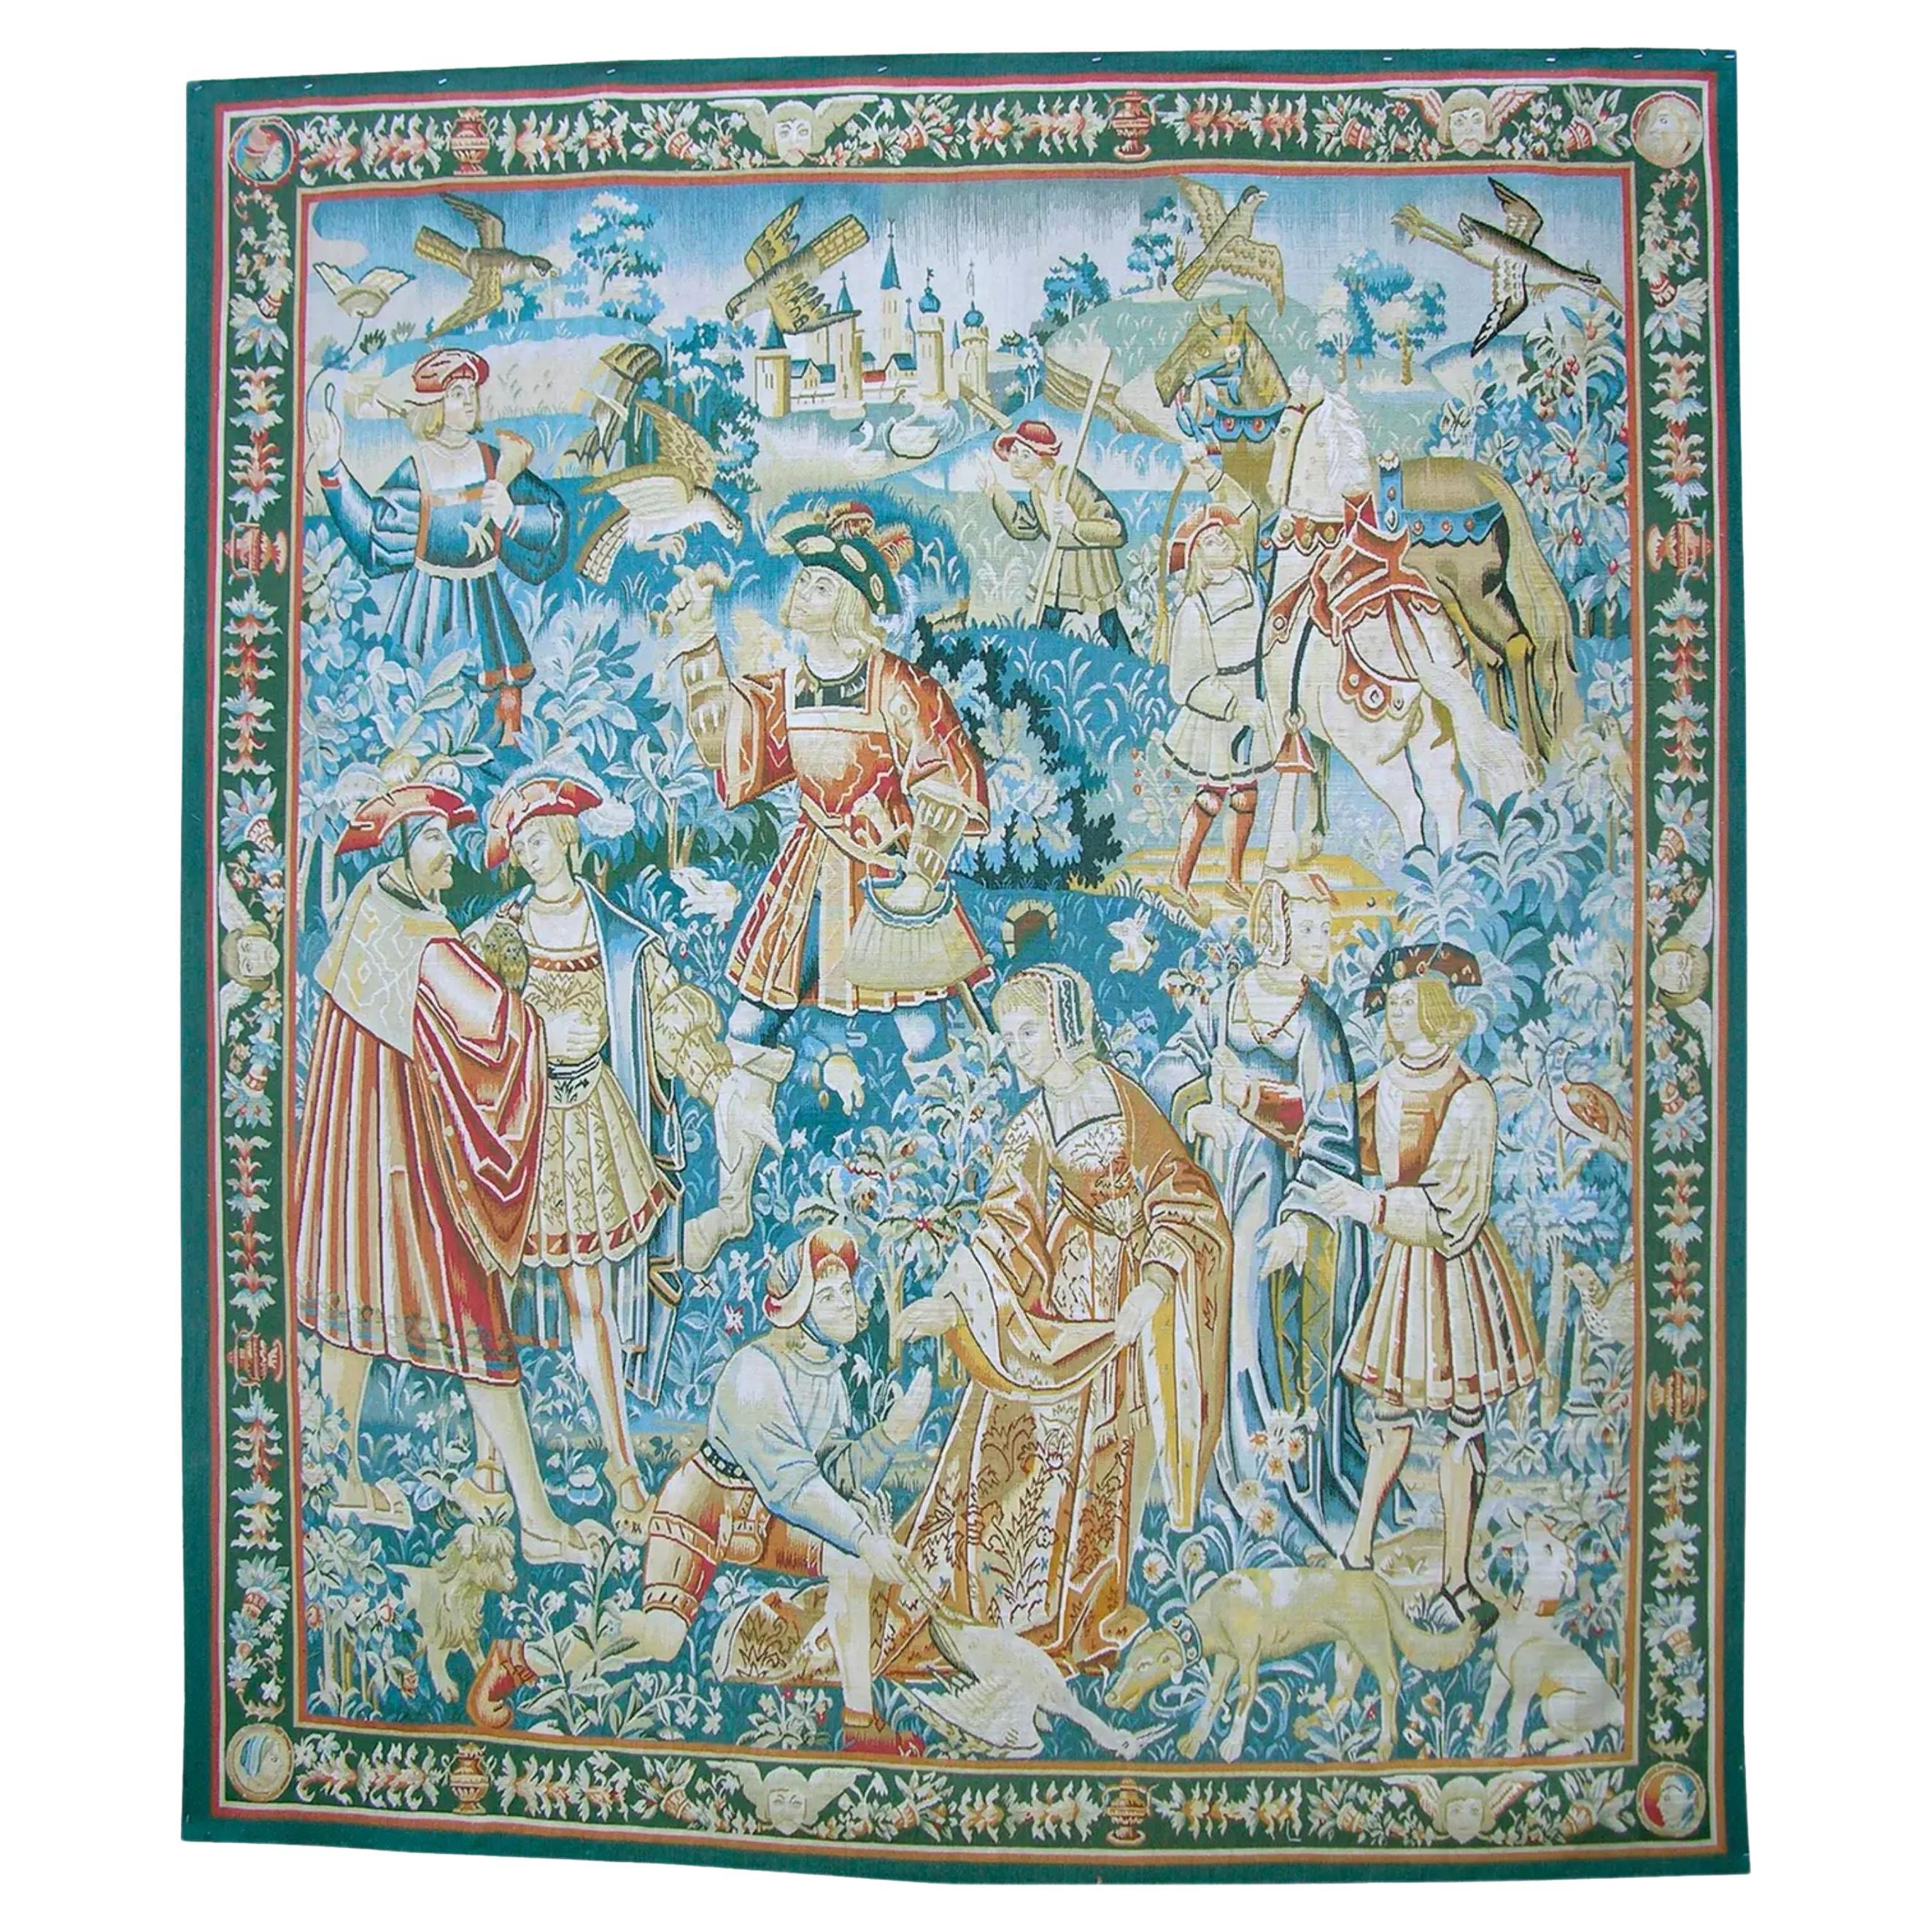 Vintage Tapestry Depicting Royalty 6.0X6.11 For Sale